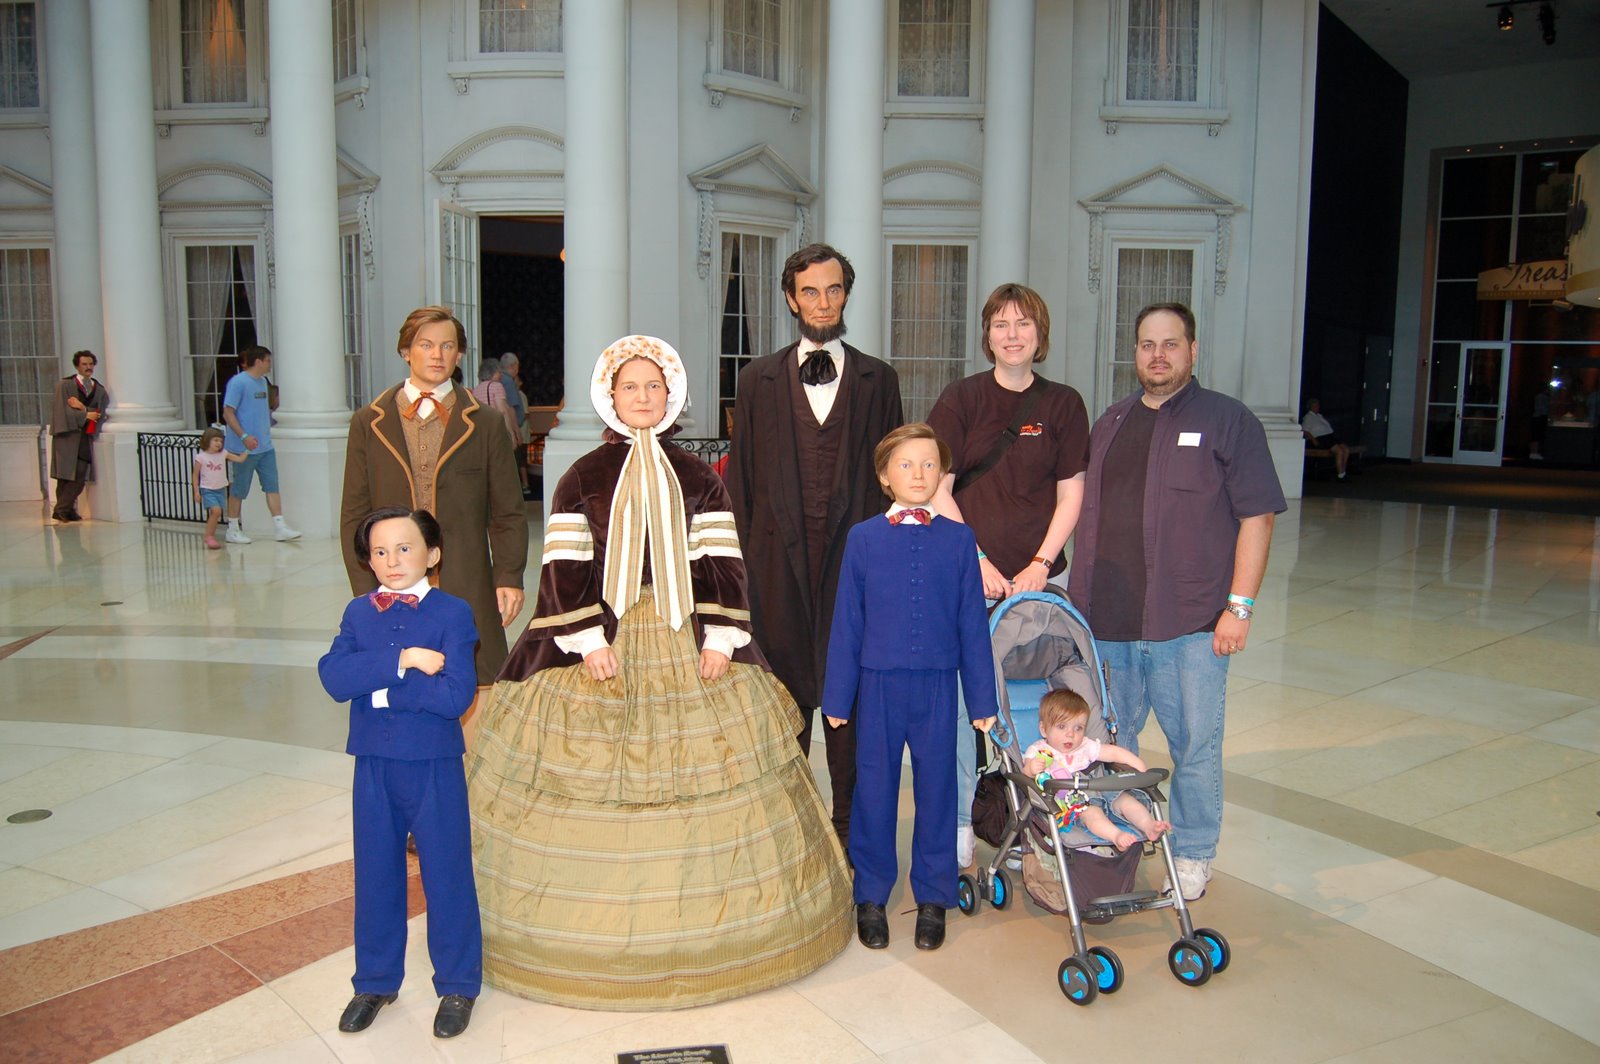 Gee, Lincoln's taller than me!